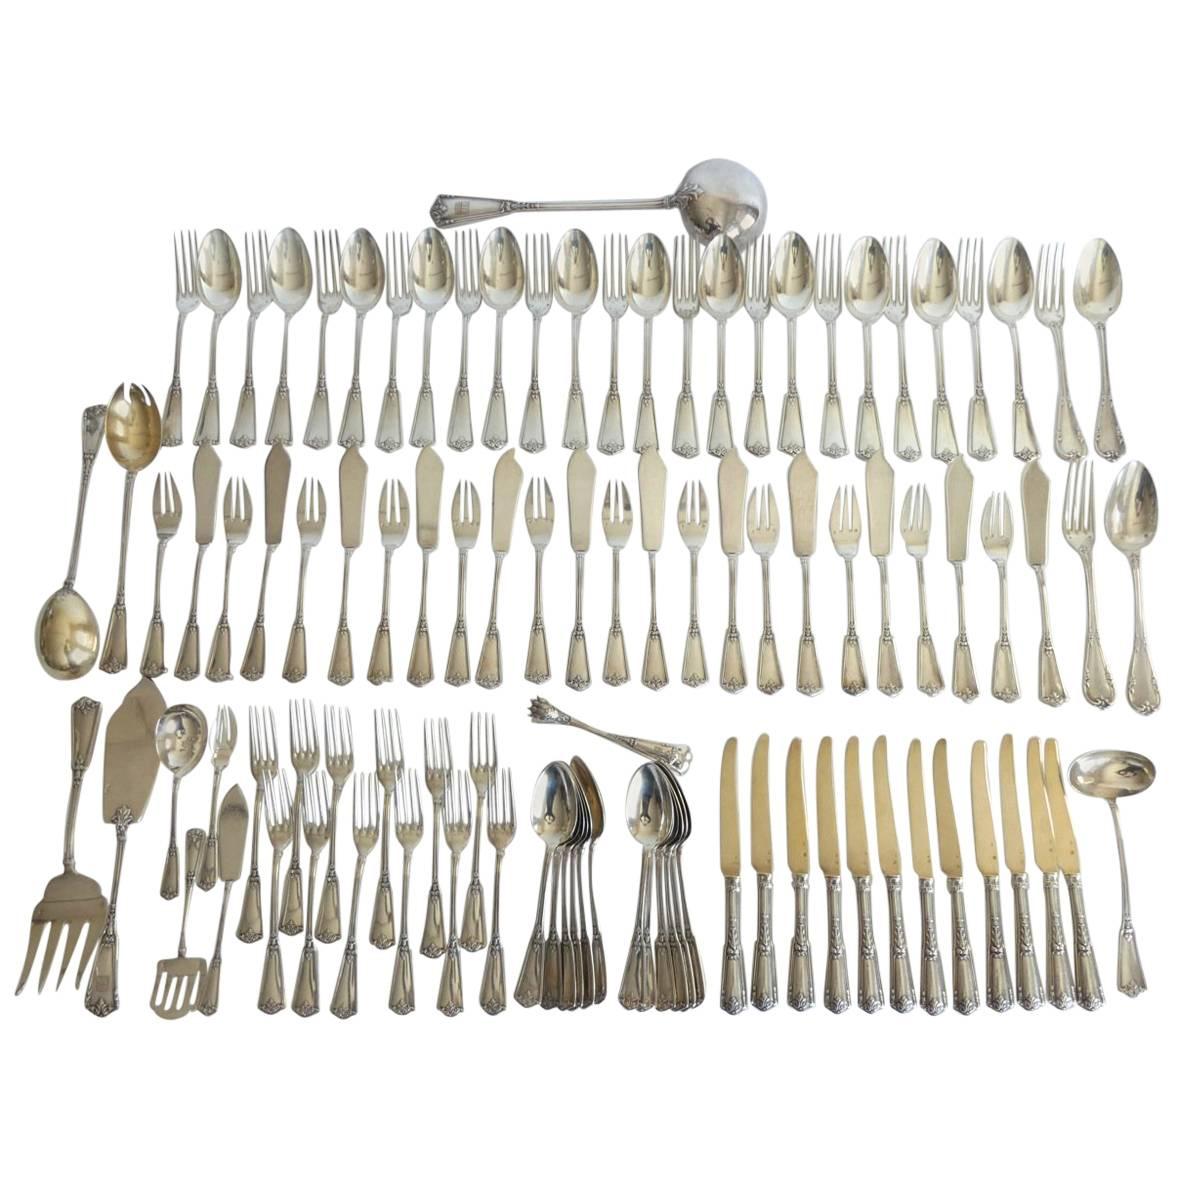 Olier & Caron French Sterling Silver Dinner Flatware